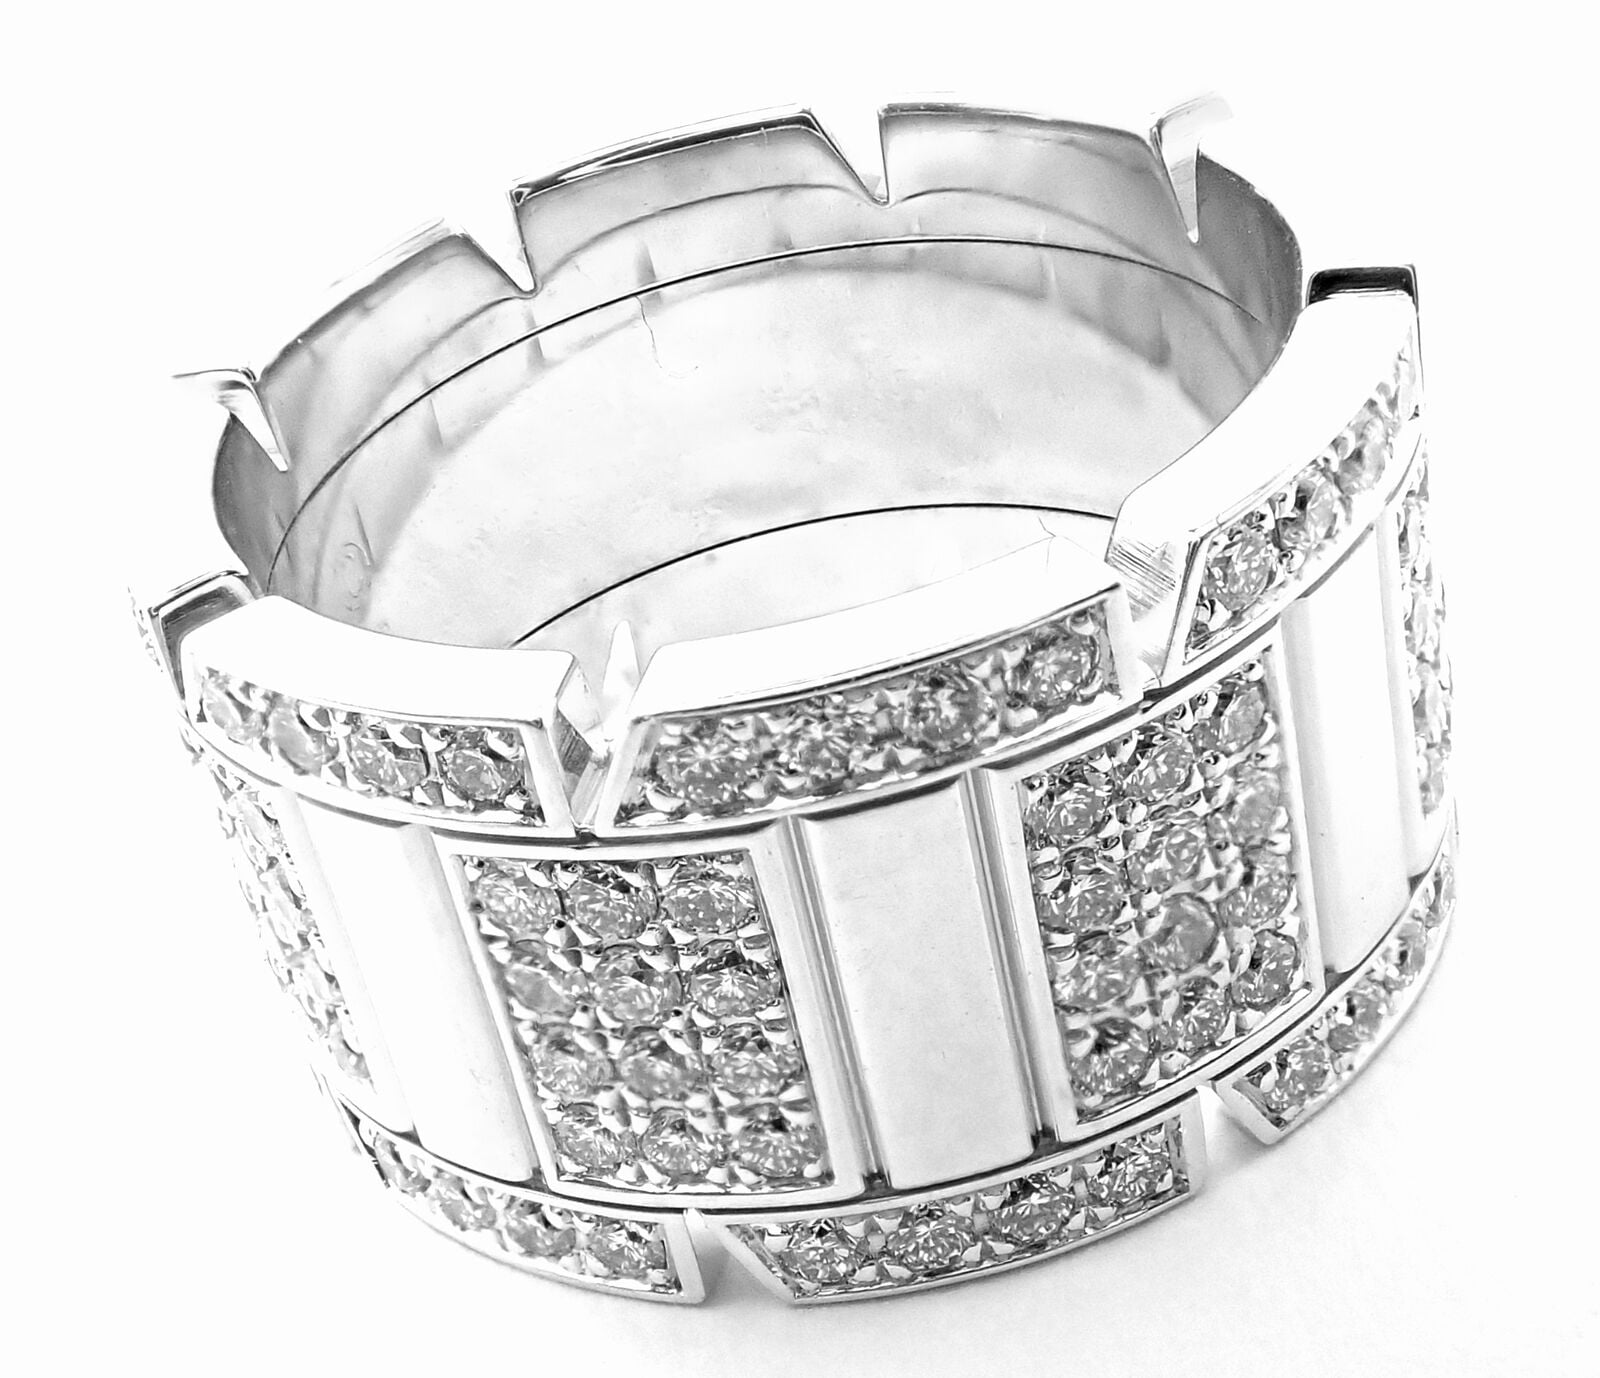 Authentic Cartier 18k White Gold Diamond Tank Francaise Large Model Band  Ring